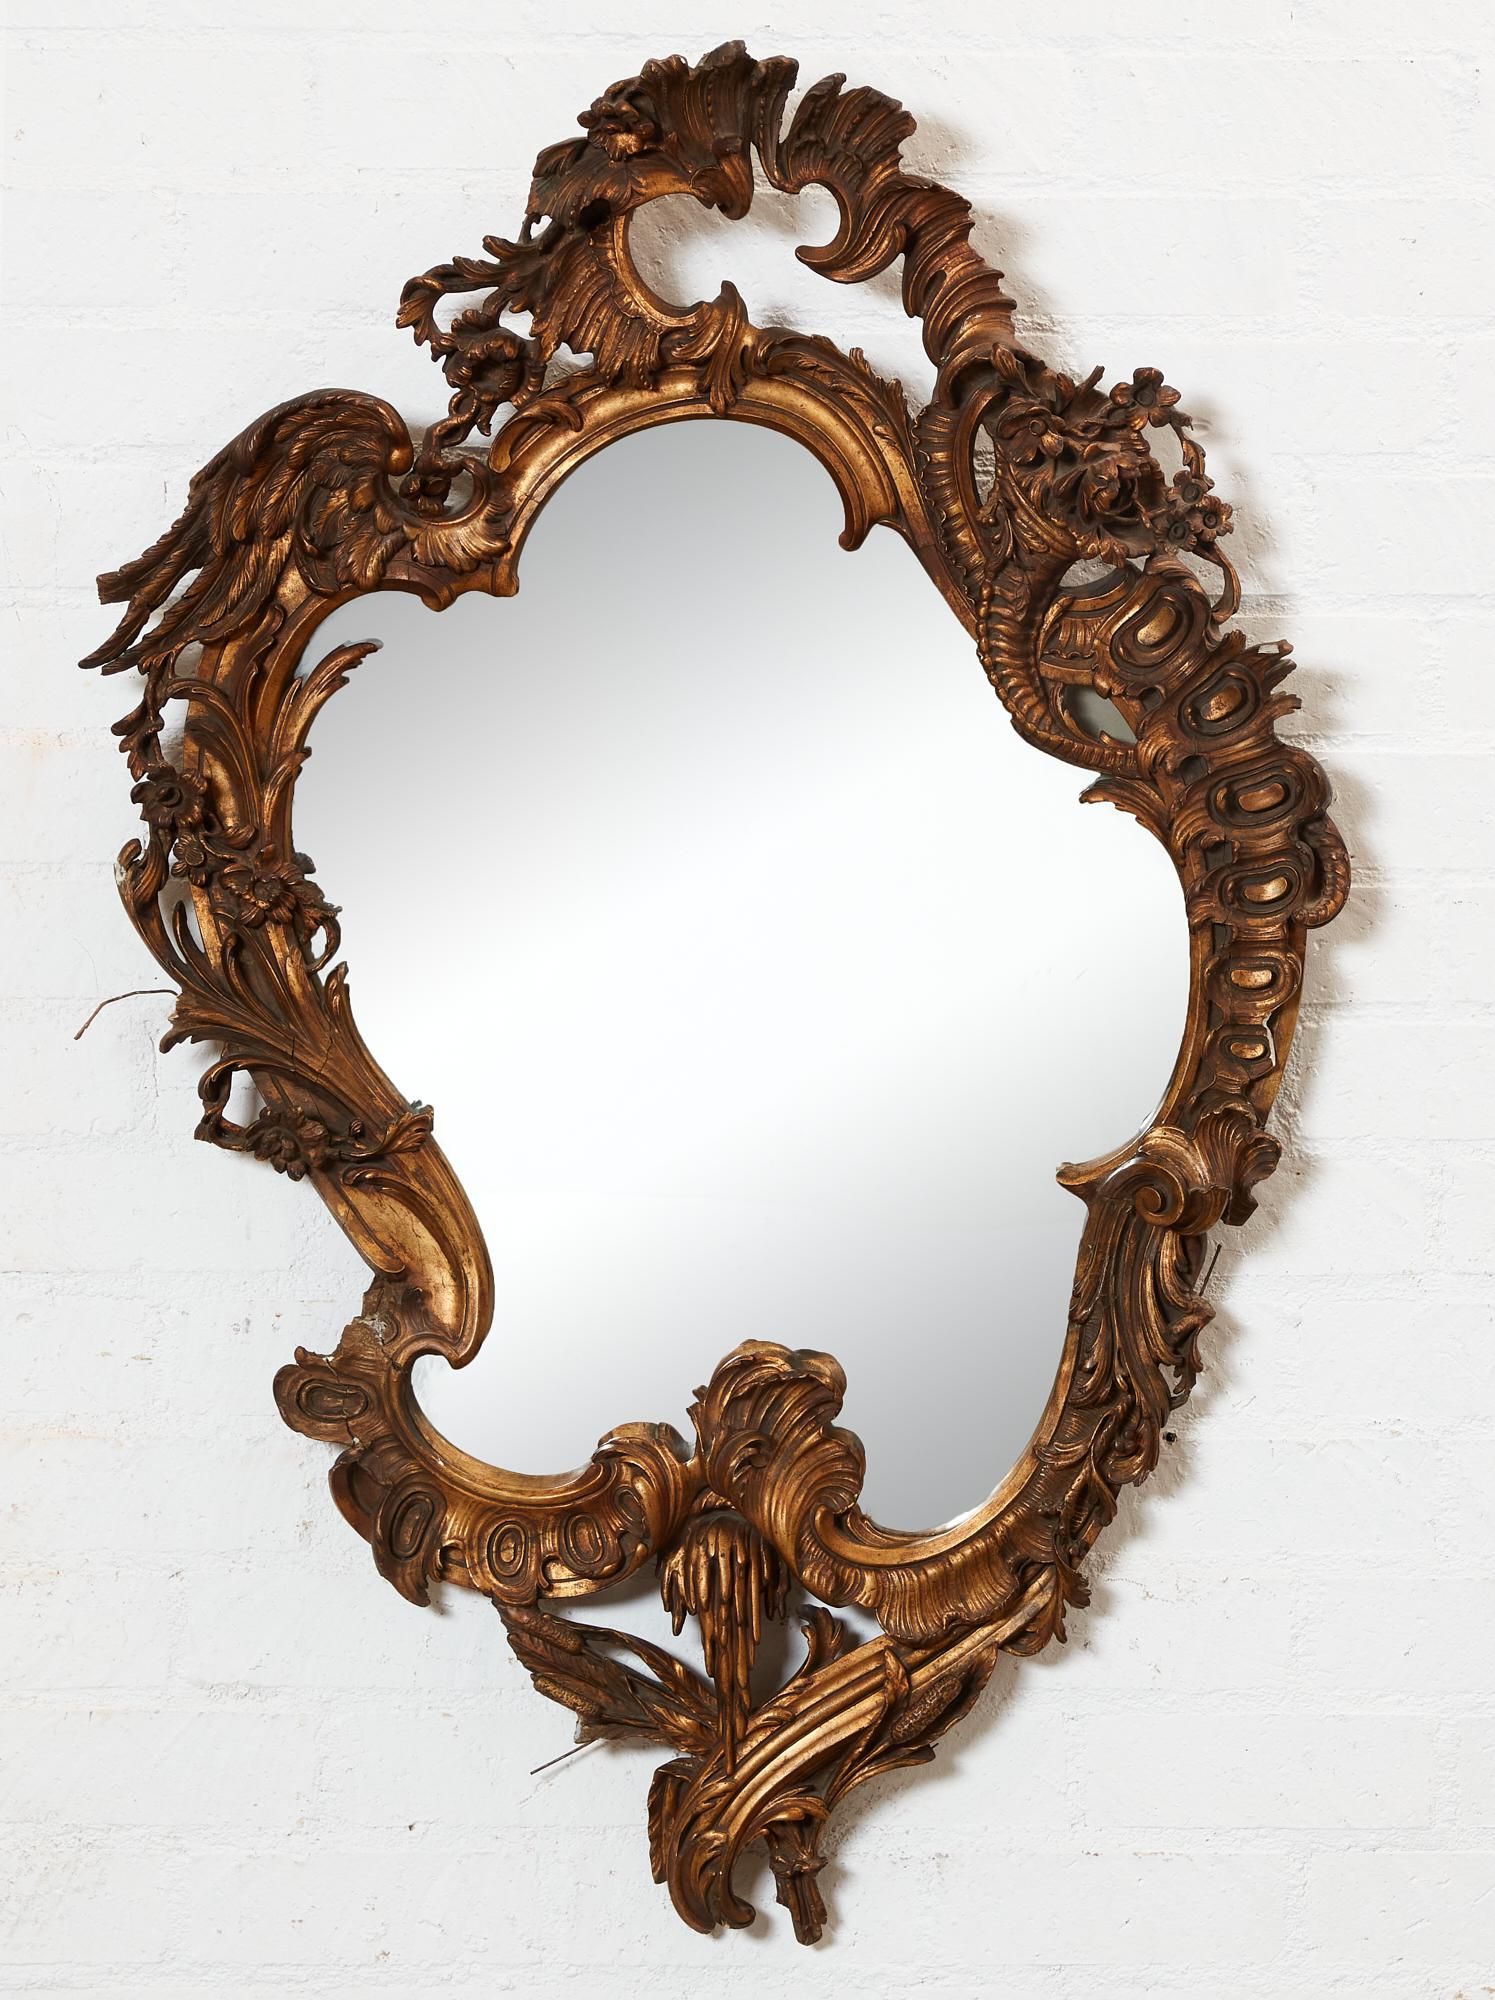 CONTINENTAL ROCOCO STYLE GILTWOOD 2fb2703